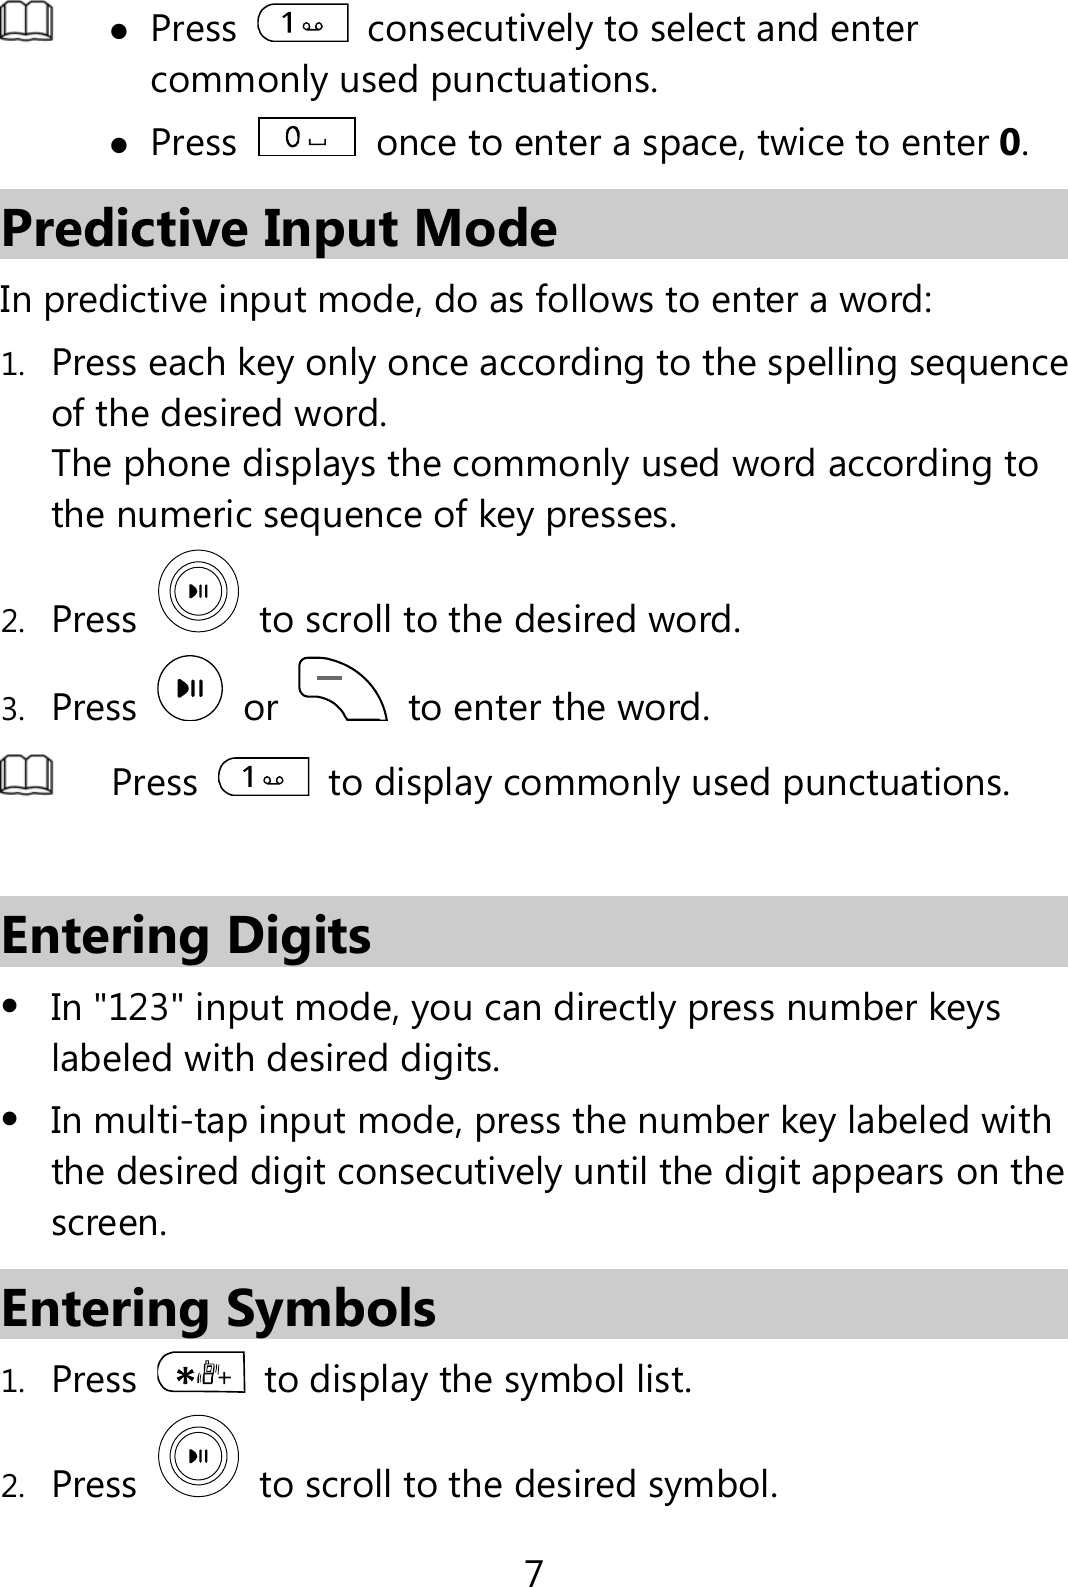 7   Press    consecutively to select and enter commonly used punctuations.  Press    once to enter a space, twice to enter 0. Predictive Input Mode In predictive input mode, do as follows to enter a word: 1. Press each key only once according to the spelling sequence of the desired word. The phone displays the commonly used word according to the numeric sequence of key presses. 2. Press    to scroll to the desired word. 3. Press   or   to enter the word.  Press    to display commonly used punctuations.  Entering Digits  In &quot;123&quot; input mode, you can directly press number keys labeled with desired digits.  In multi-tap input mode, press the number key labeled with the desired digit consecutively until the digit appears on the screen. Entering Symbols 1. Press    to display the symbol list. 2. Press    to scroll to the desired symbol. 